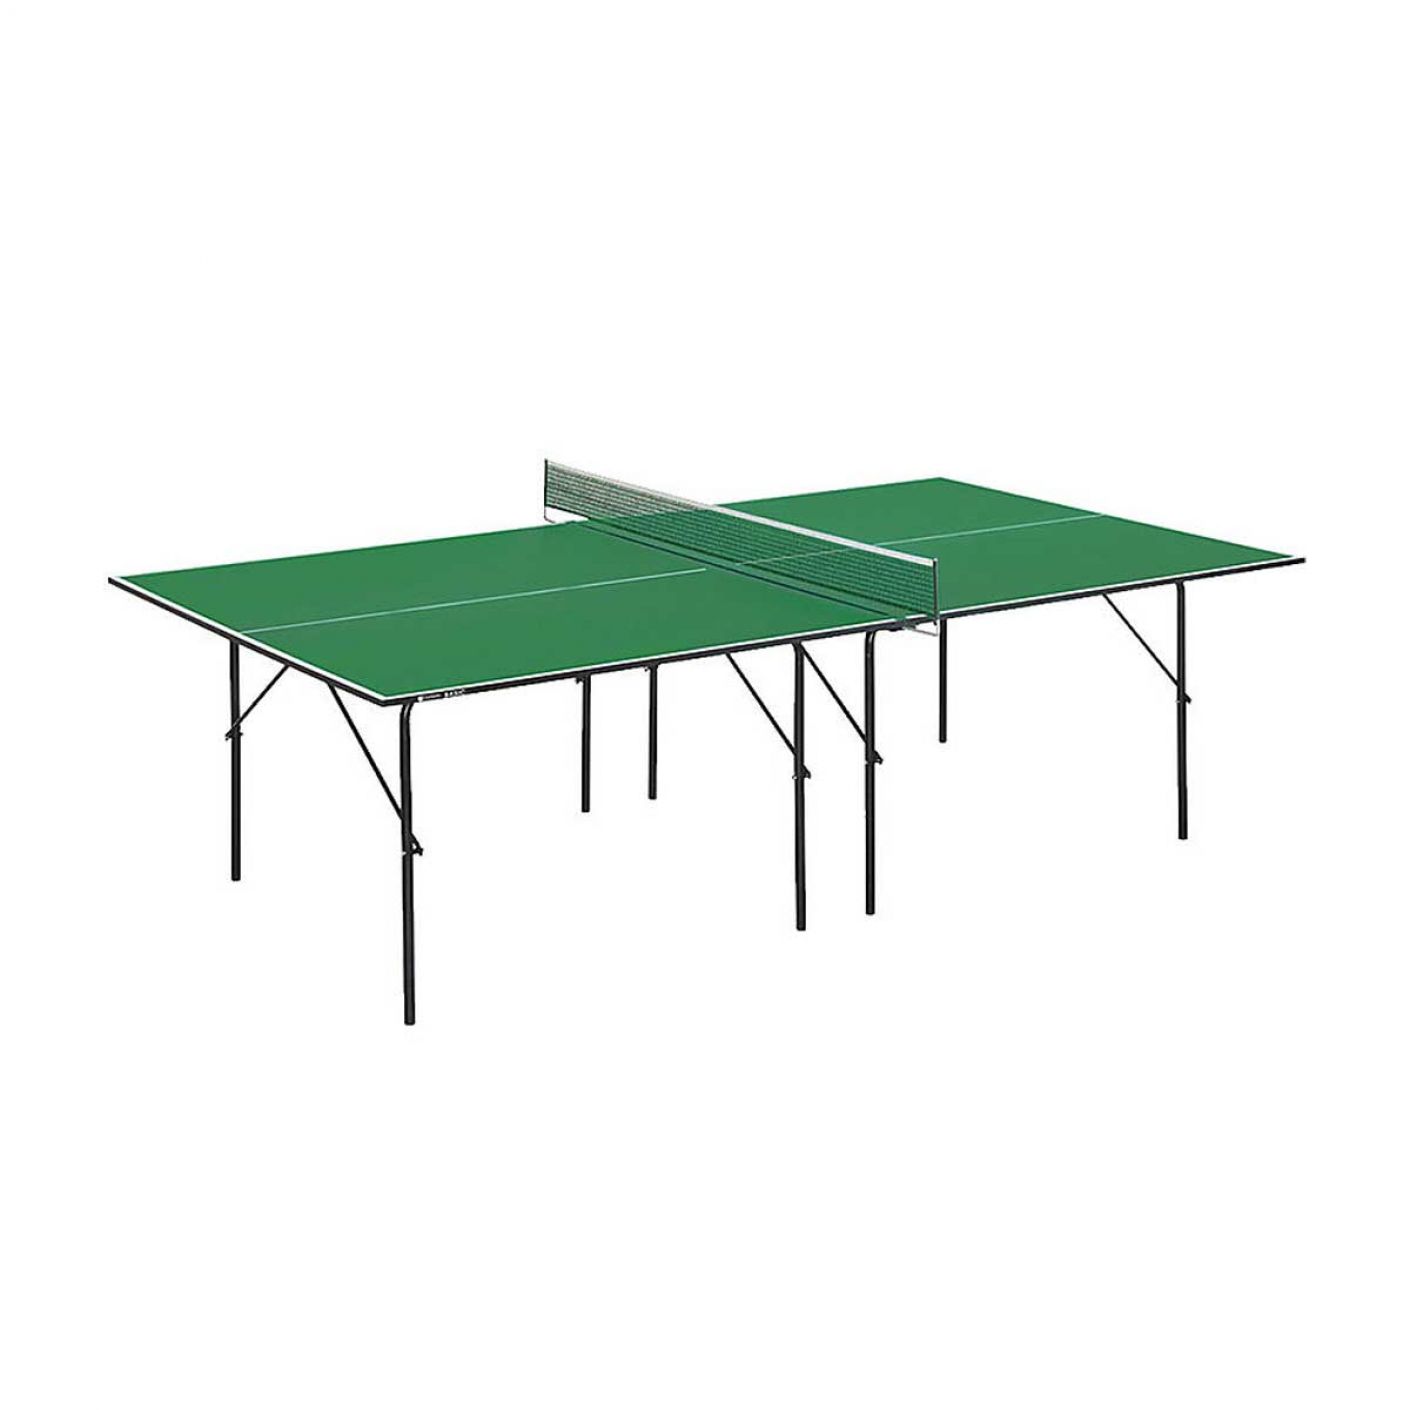 Garlando Basic Ping Pong Table 4 service wheels for indoor use